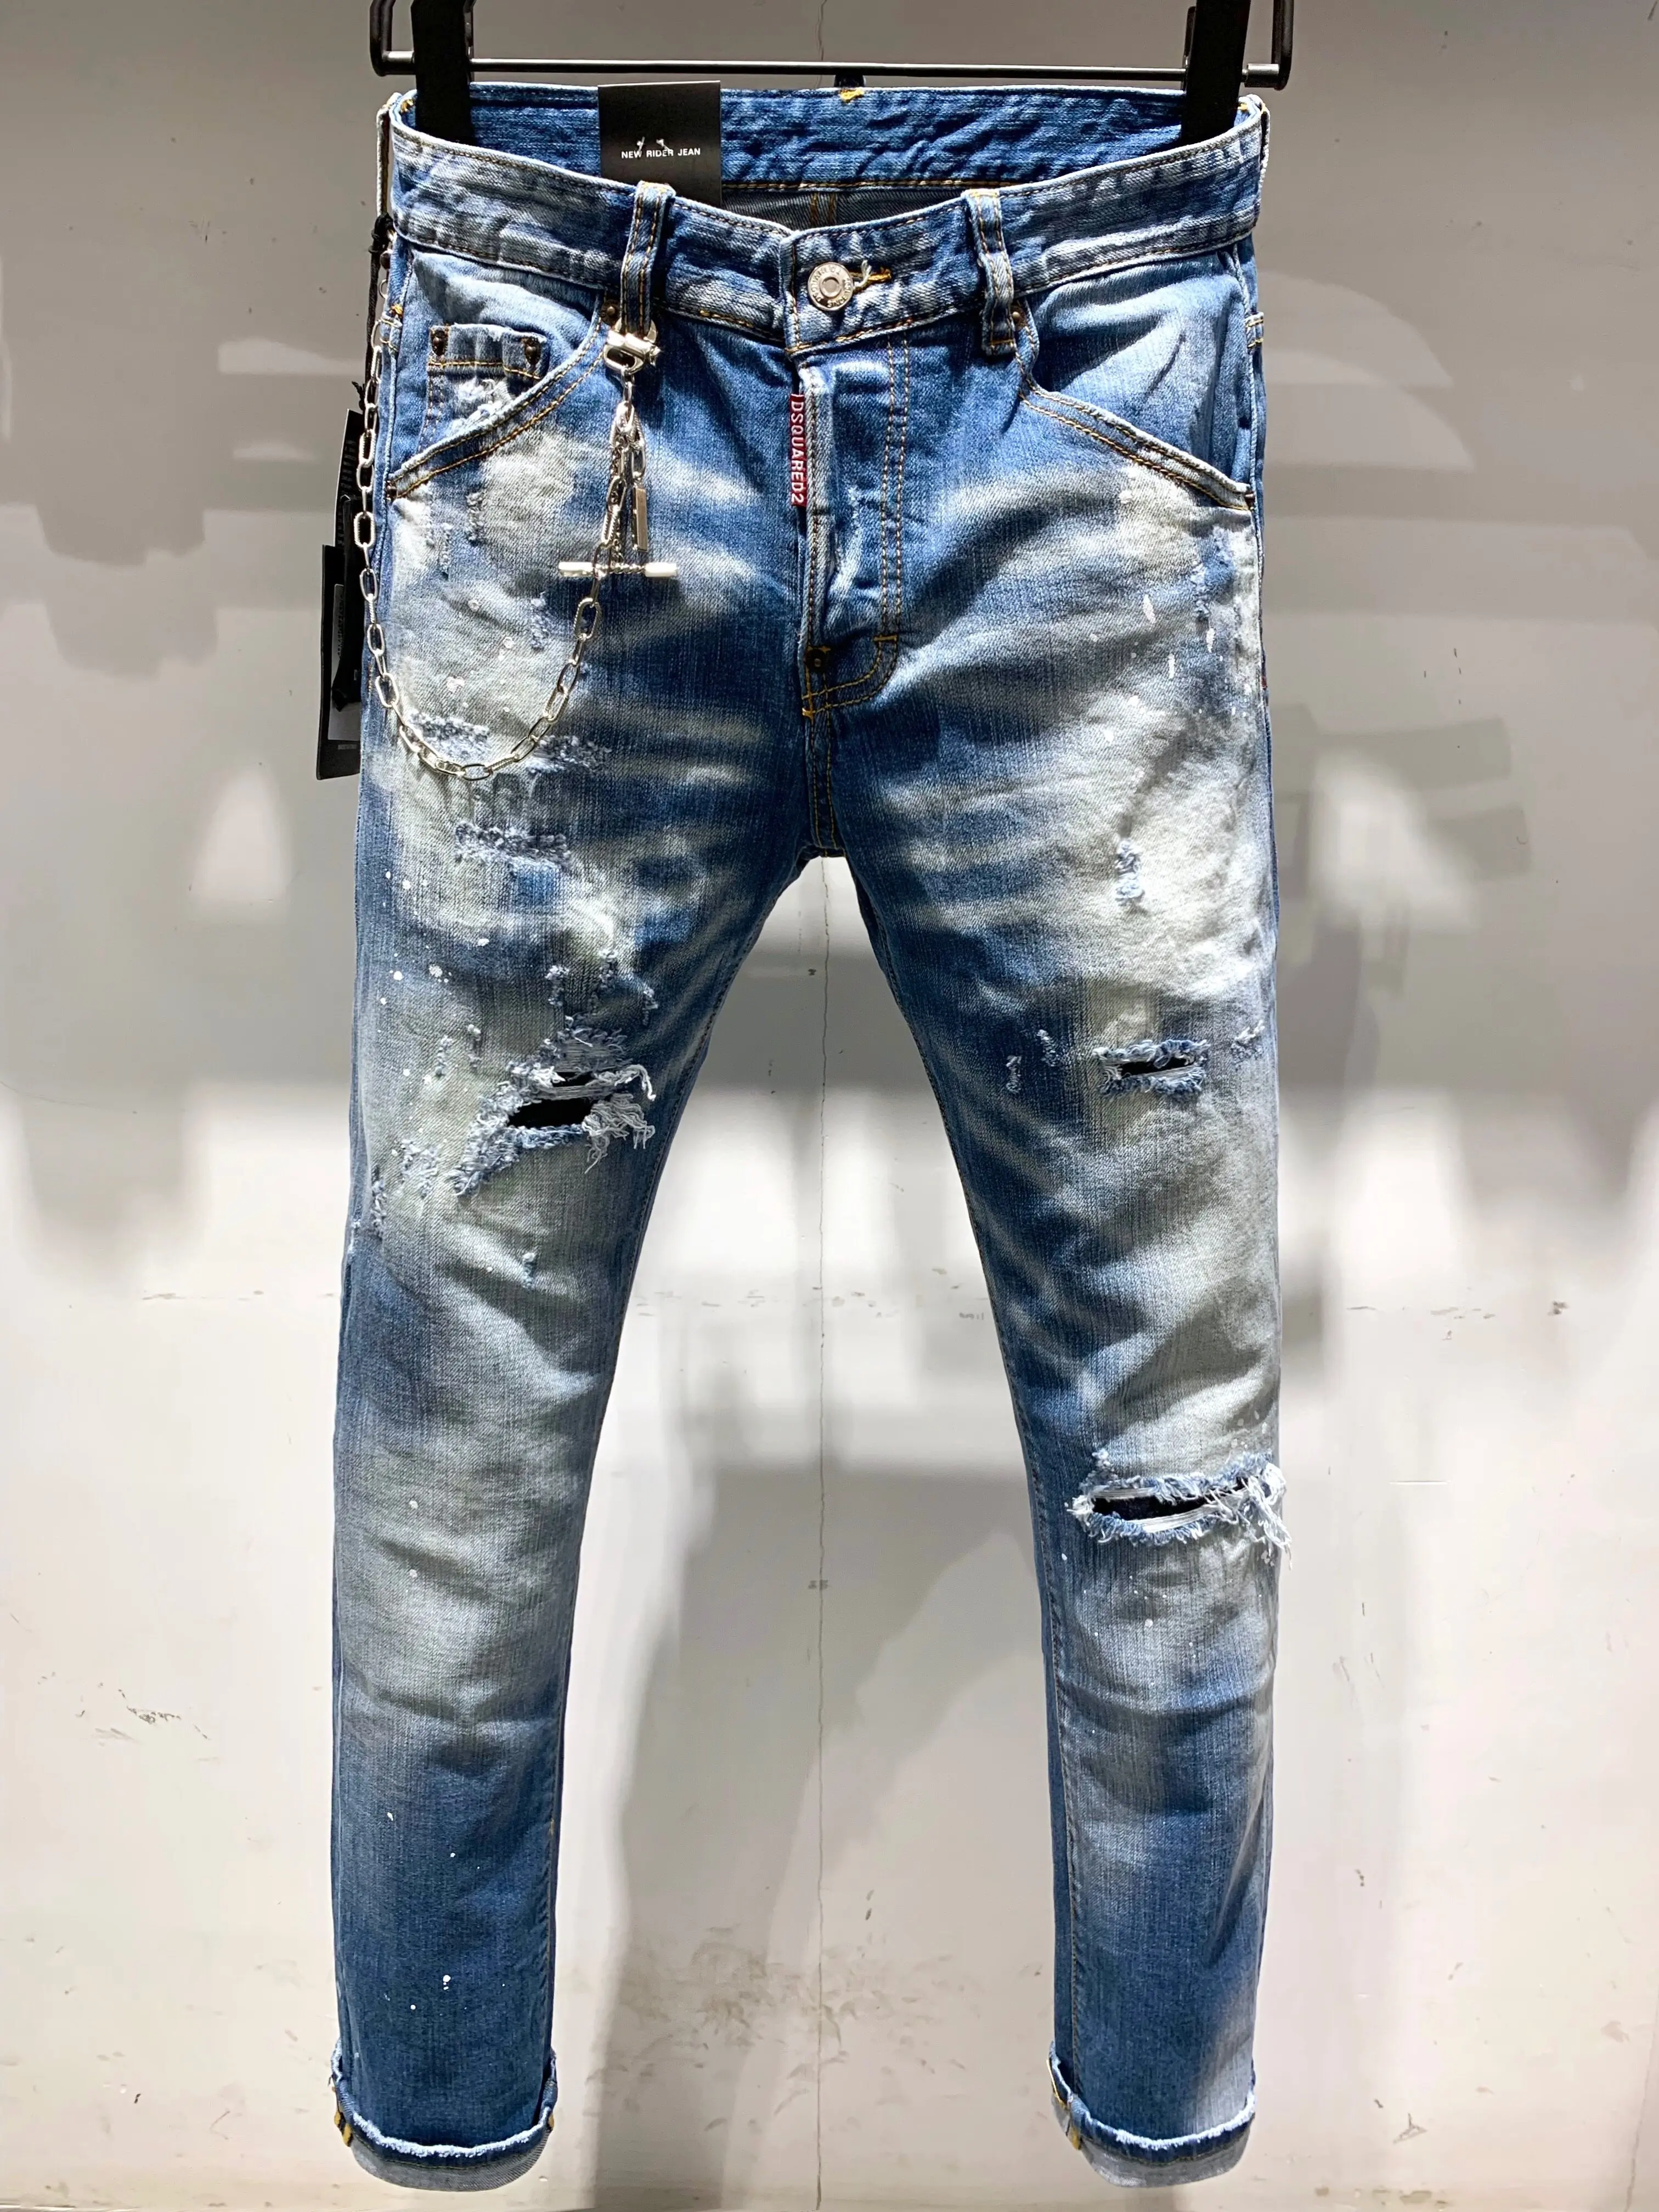 New D2 Chain Design Couple Washed Jeans Dsquared2 Fashion Ripped Jeans Boyfriend Gift Distressed Streetwear Sizes 46-52 9629